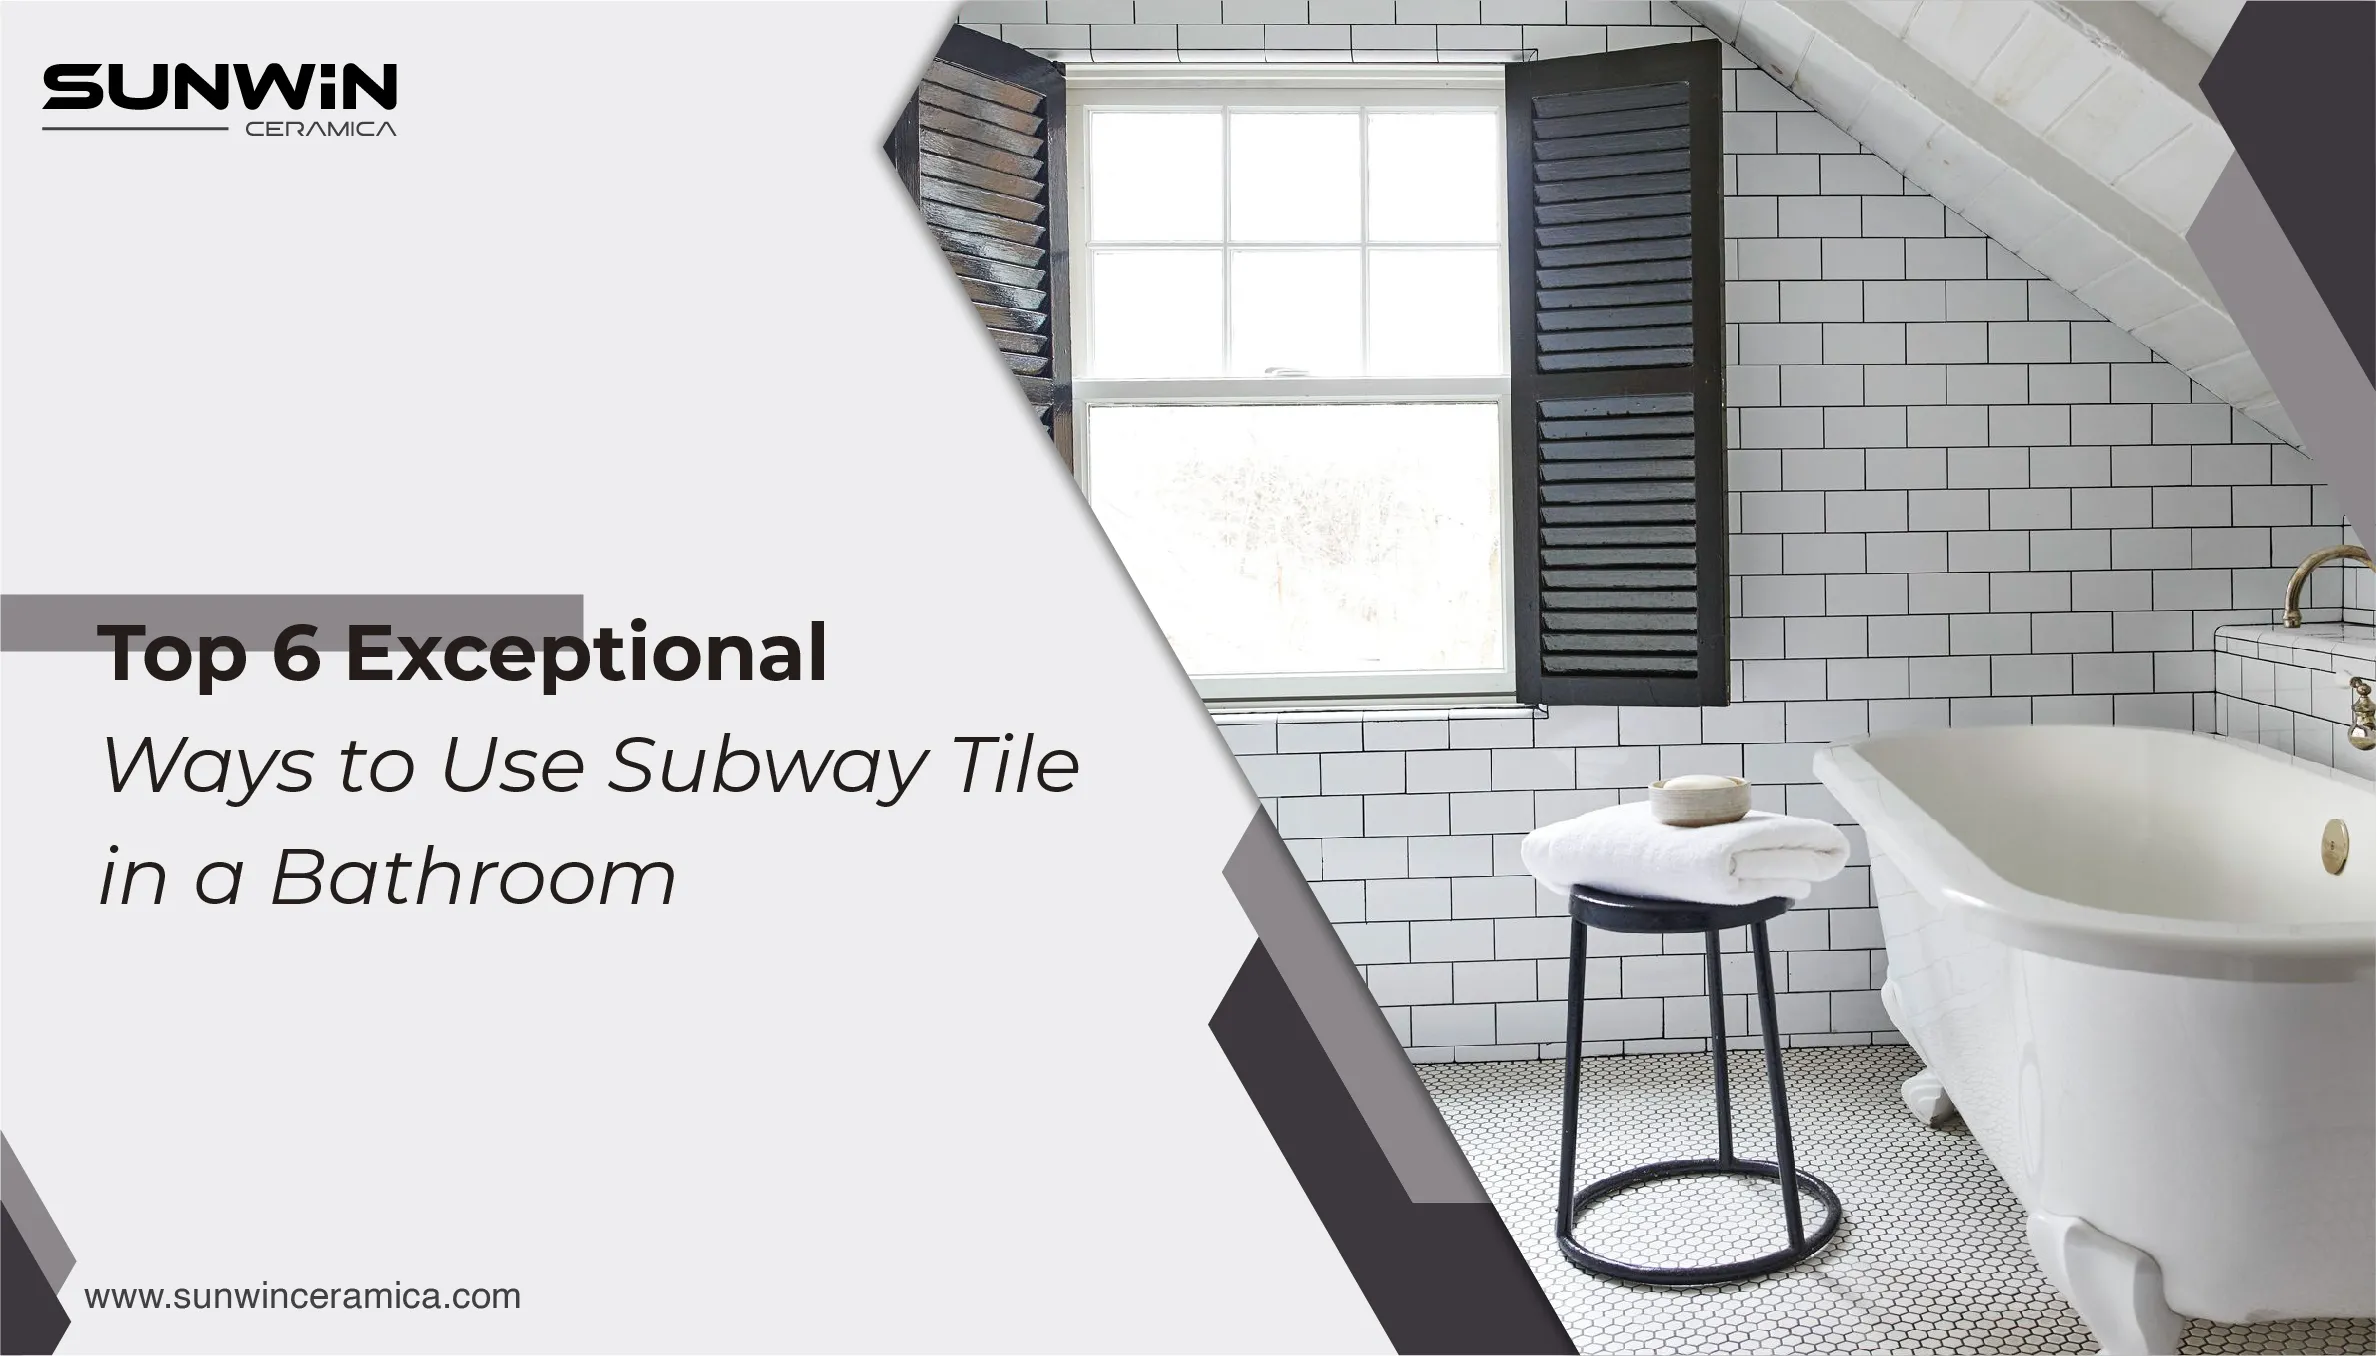 Top 6 Exceptional Ways to Use Subway Tile in a Bathroom